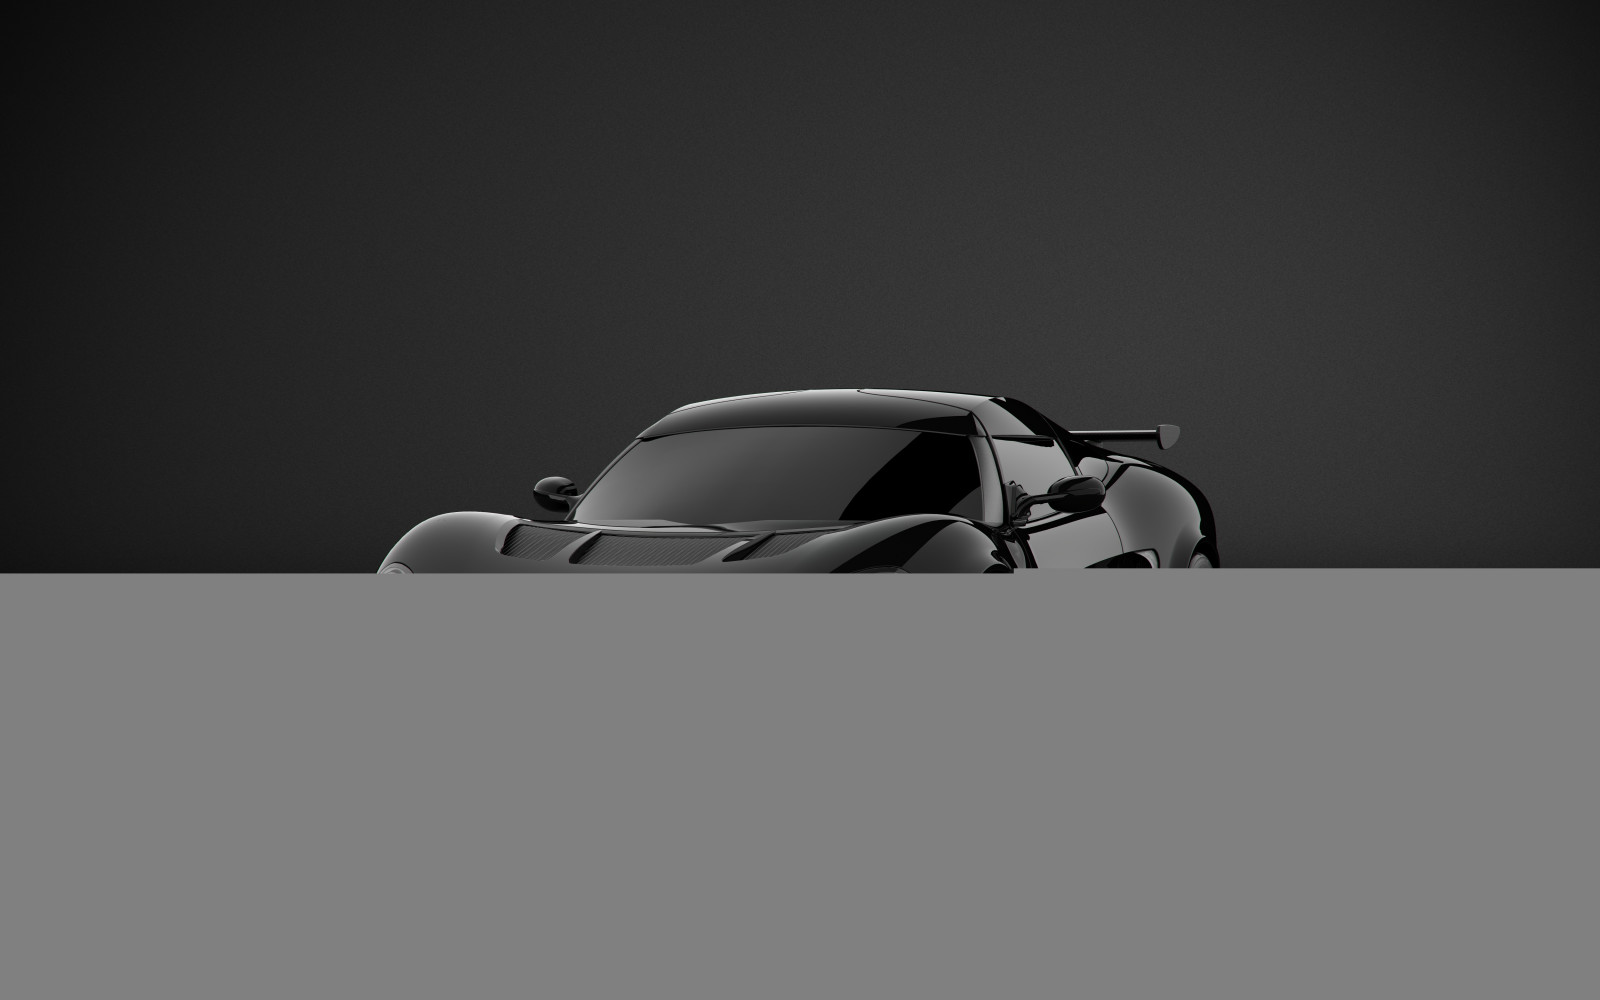 Melkus Rs2000 Black Edition Wallpapers